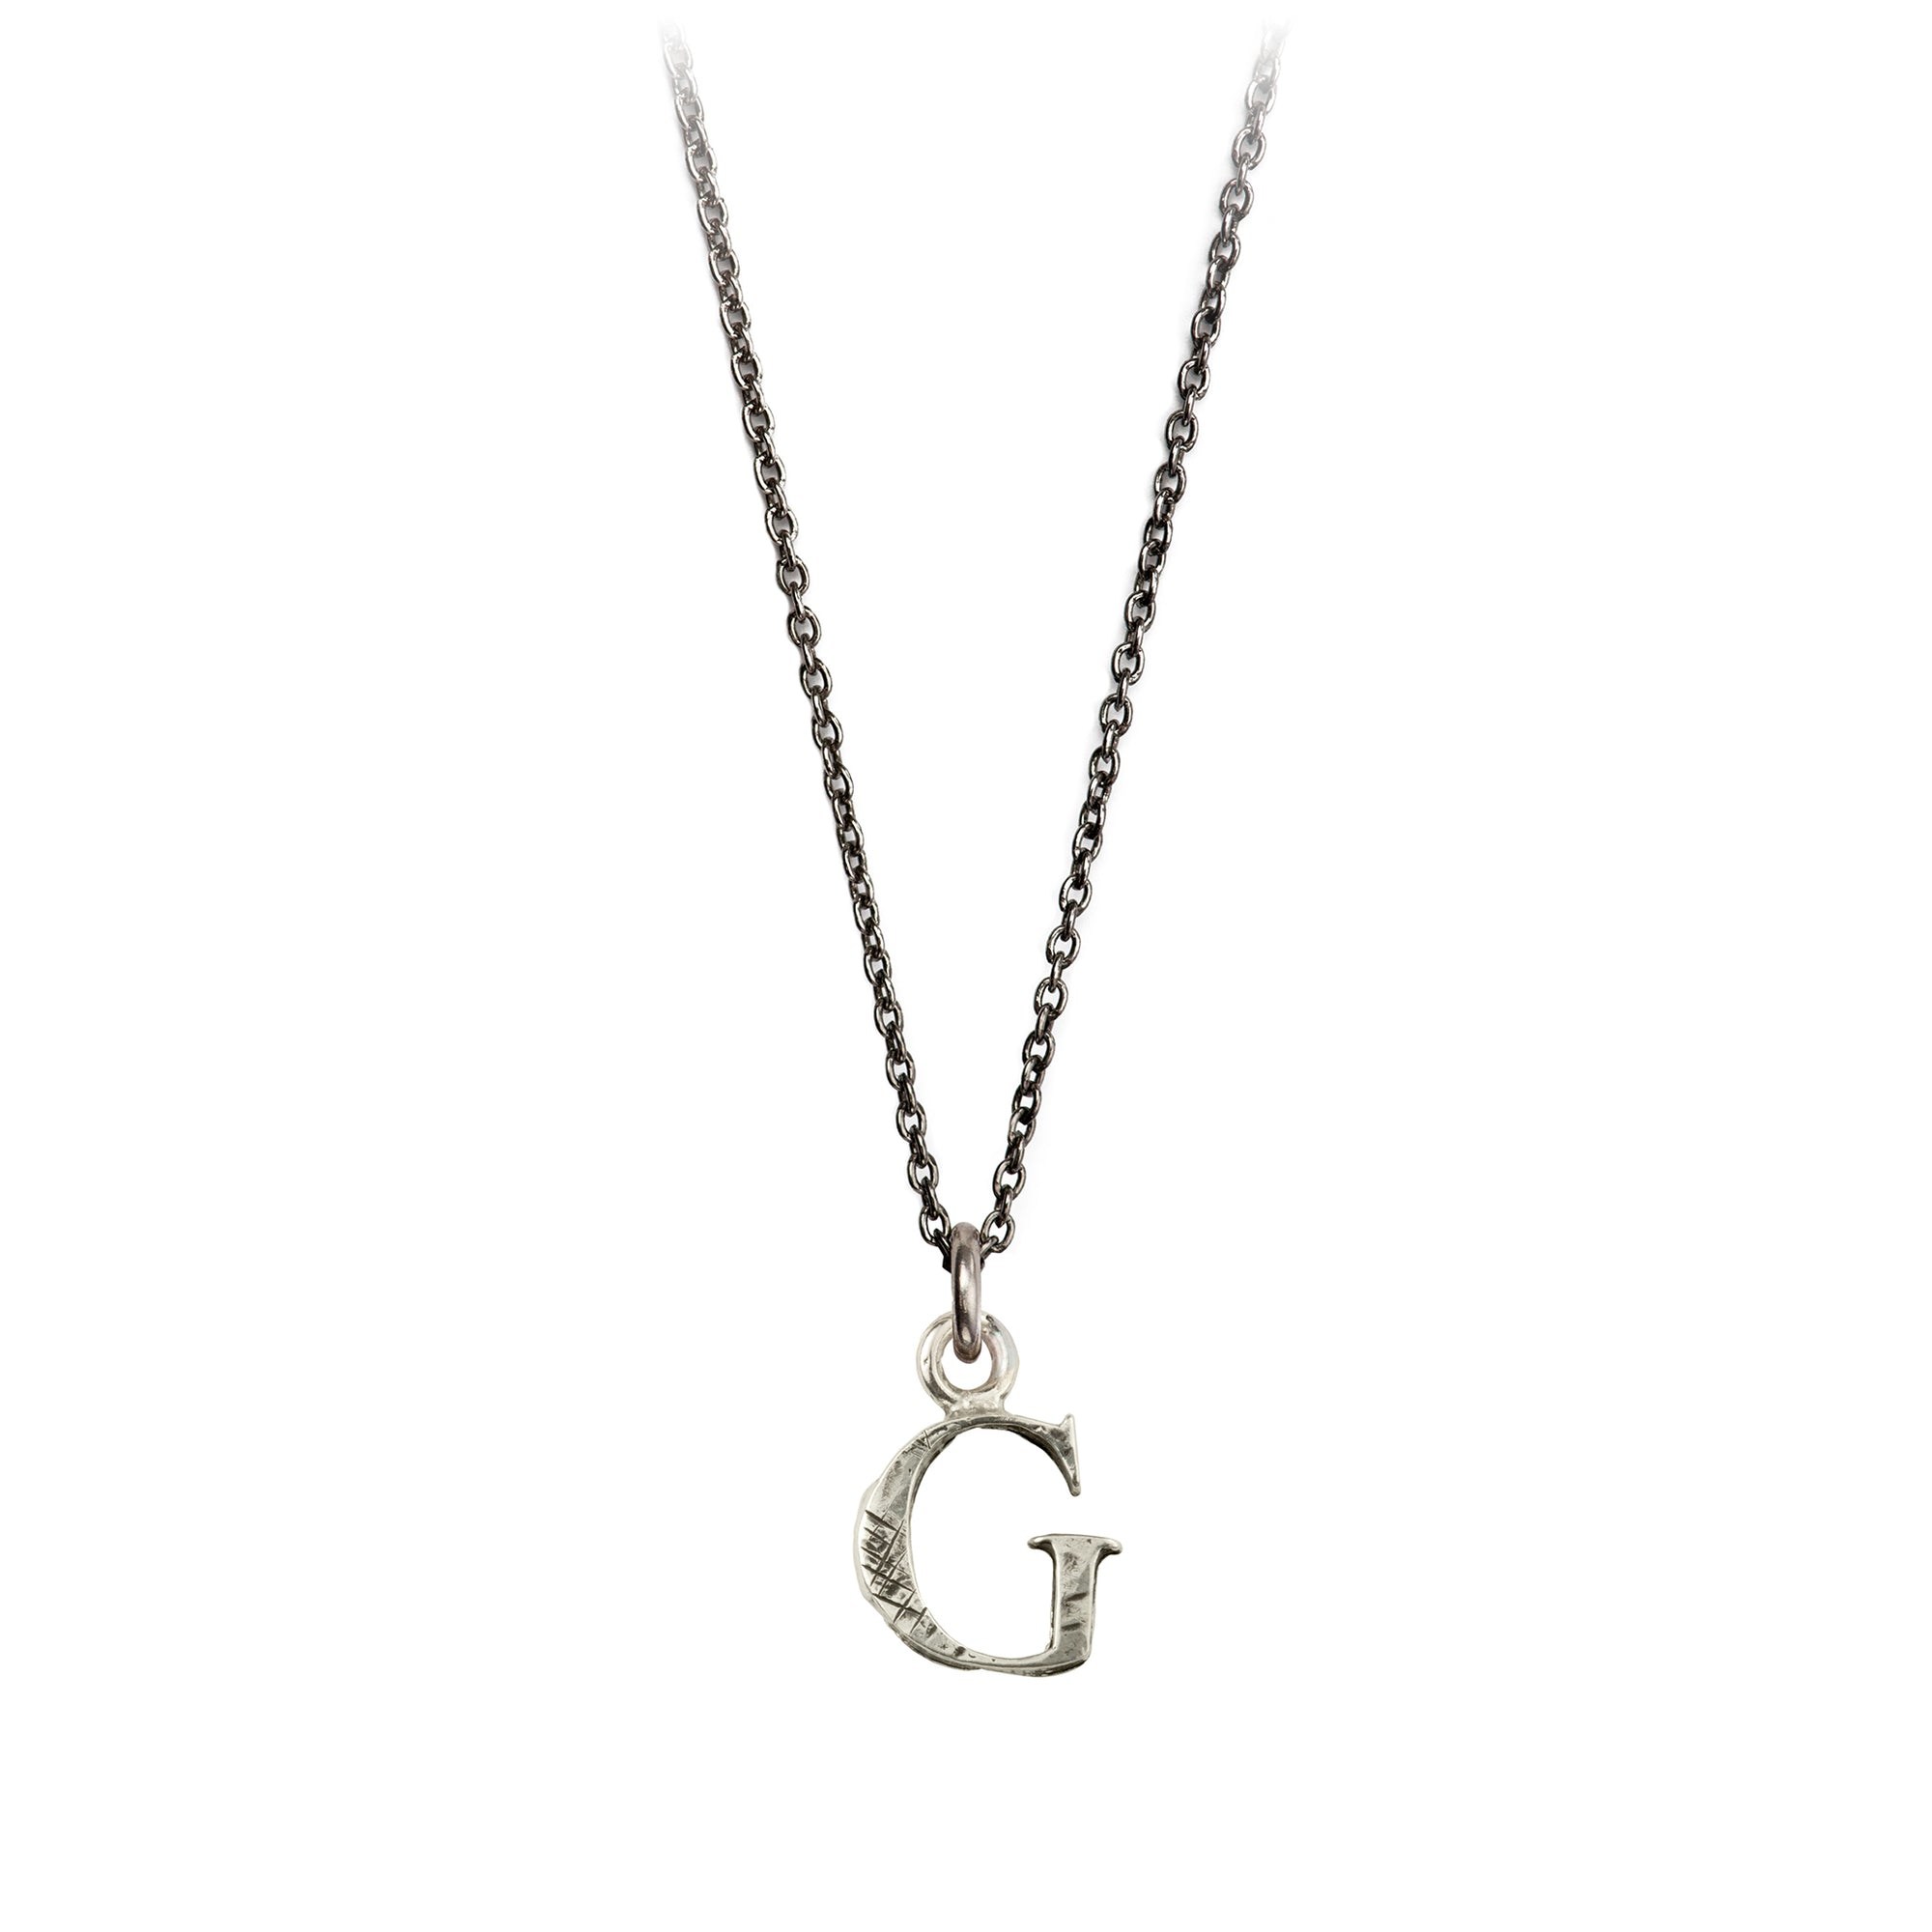 A sterling silver letter "G" charm on a silver chain.